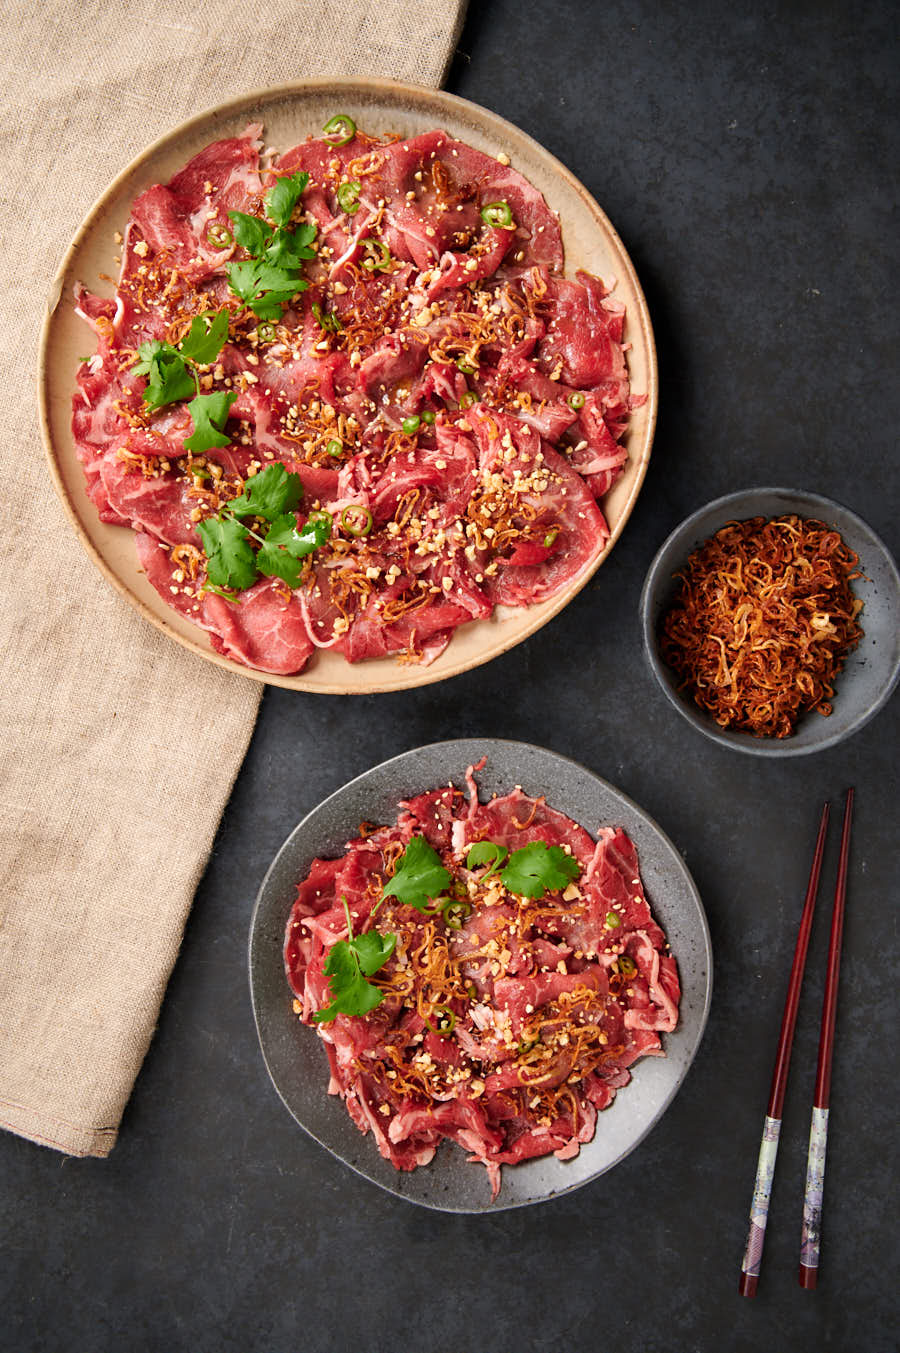 Plate and platter of Asian style carpaccio from above.